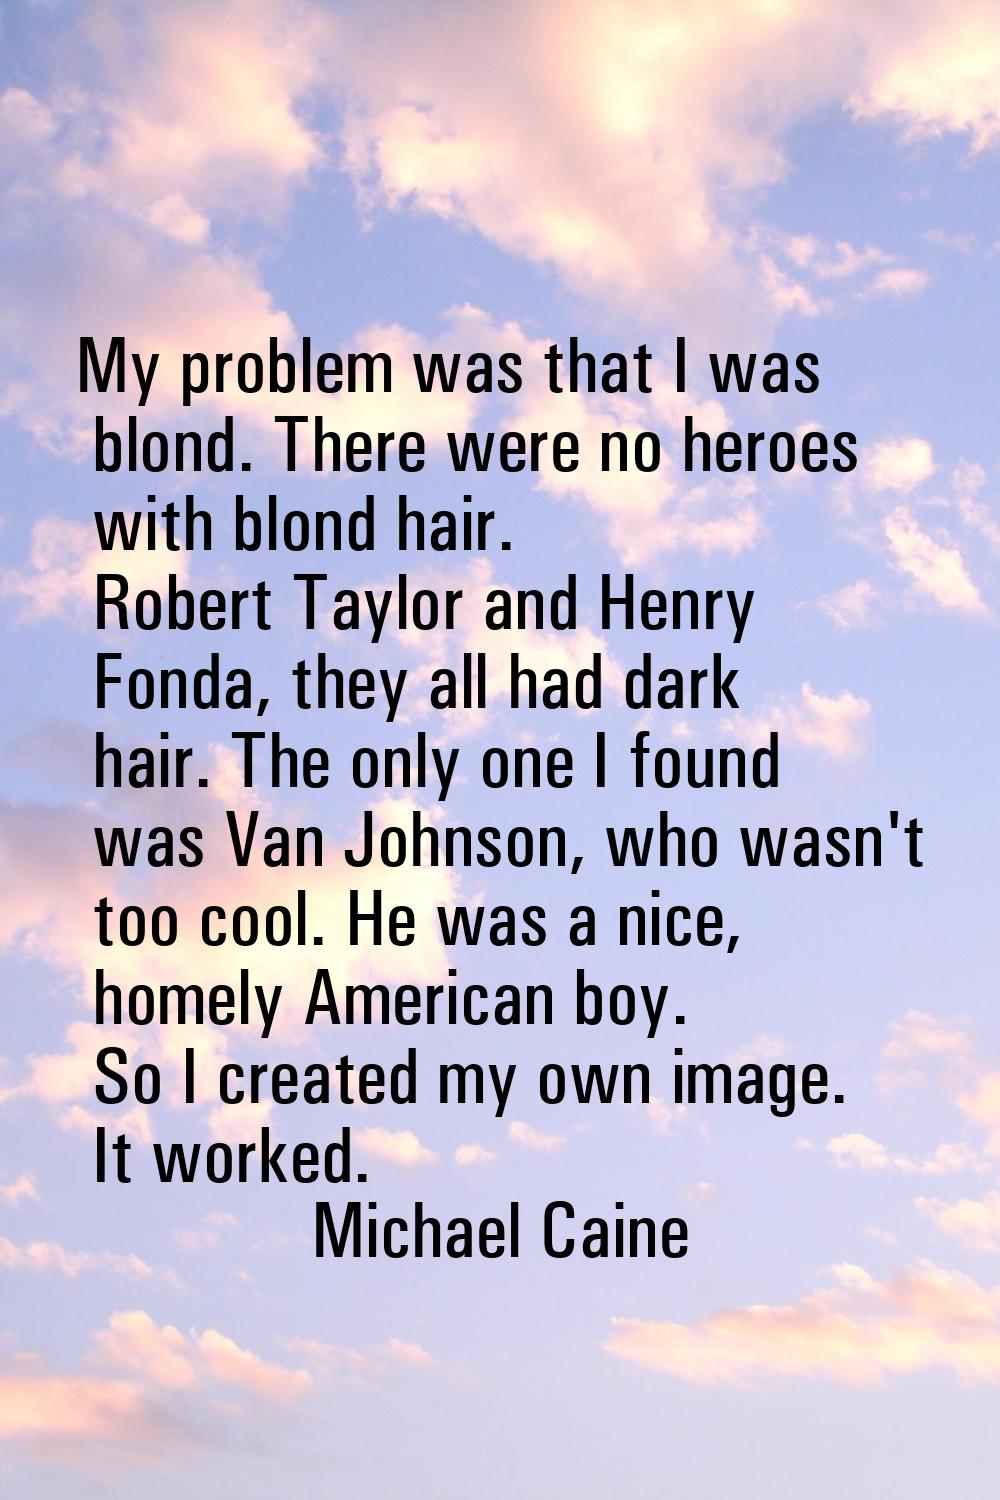 My problem was that I was blond. There were no heroes with blond hair. Robert Taylor and Henry Fond